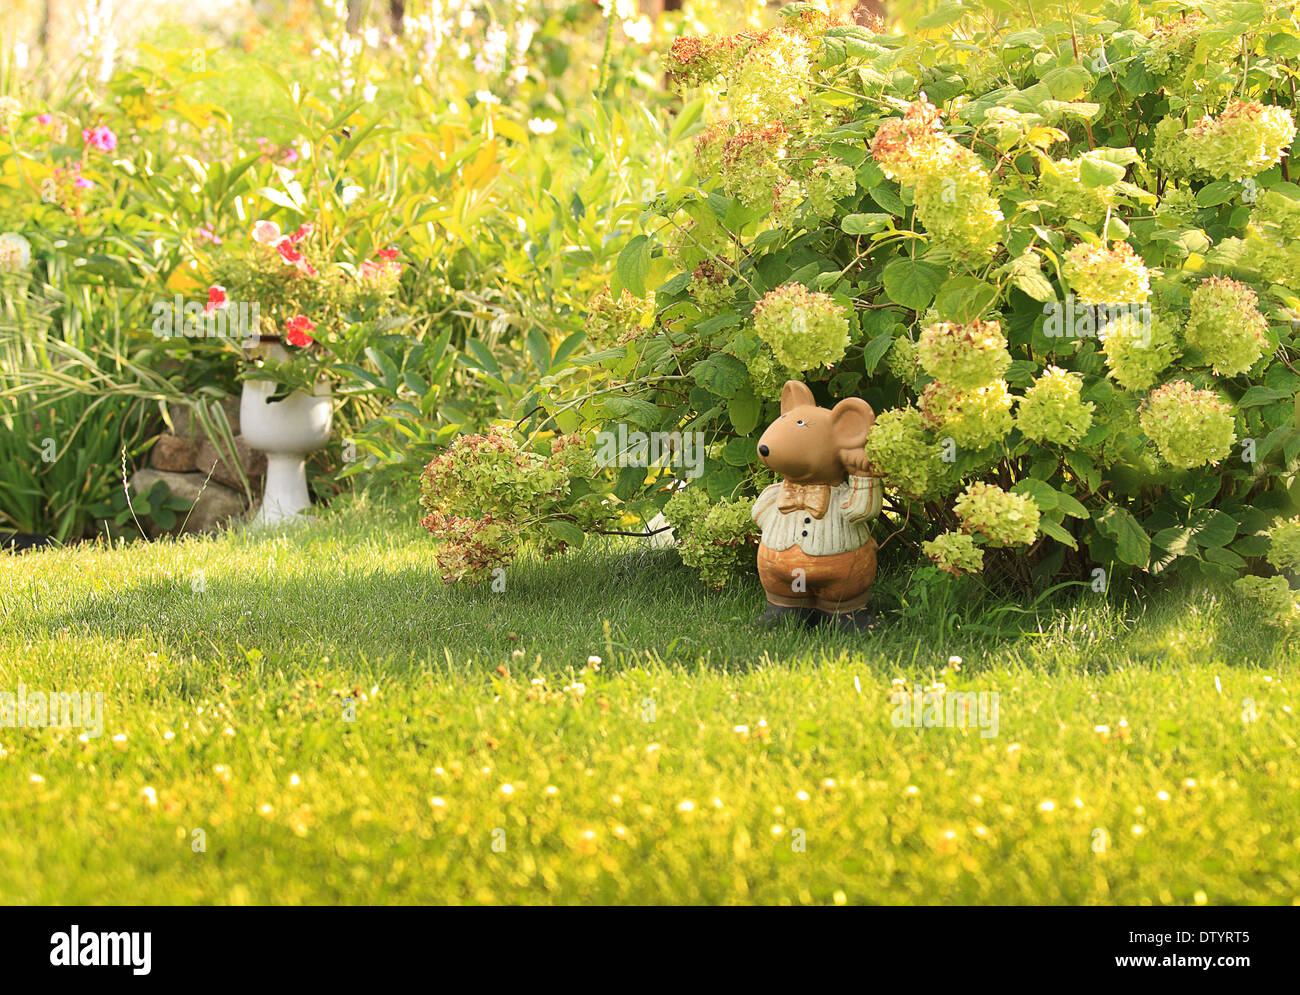 Figurine, clay mouse is on a well-kept lawn, green grass, next to a bush blooming hydrangeas. Sunny summer day. Stock Photo